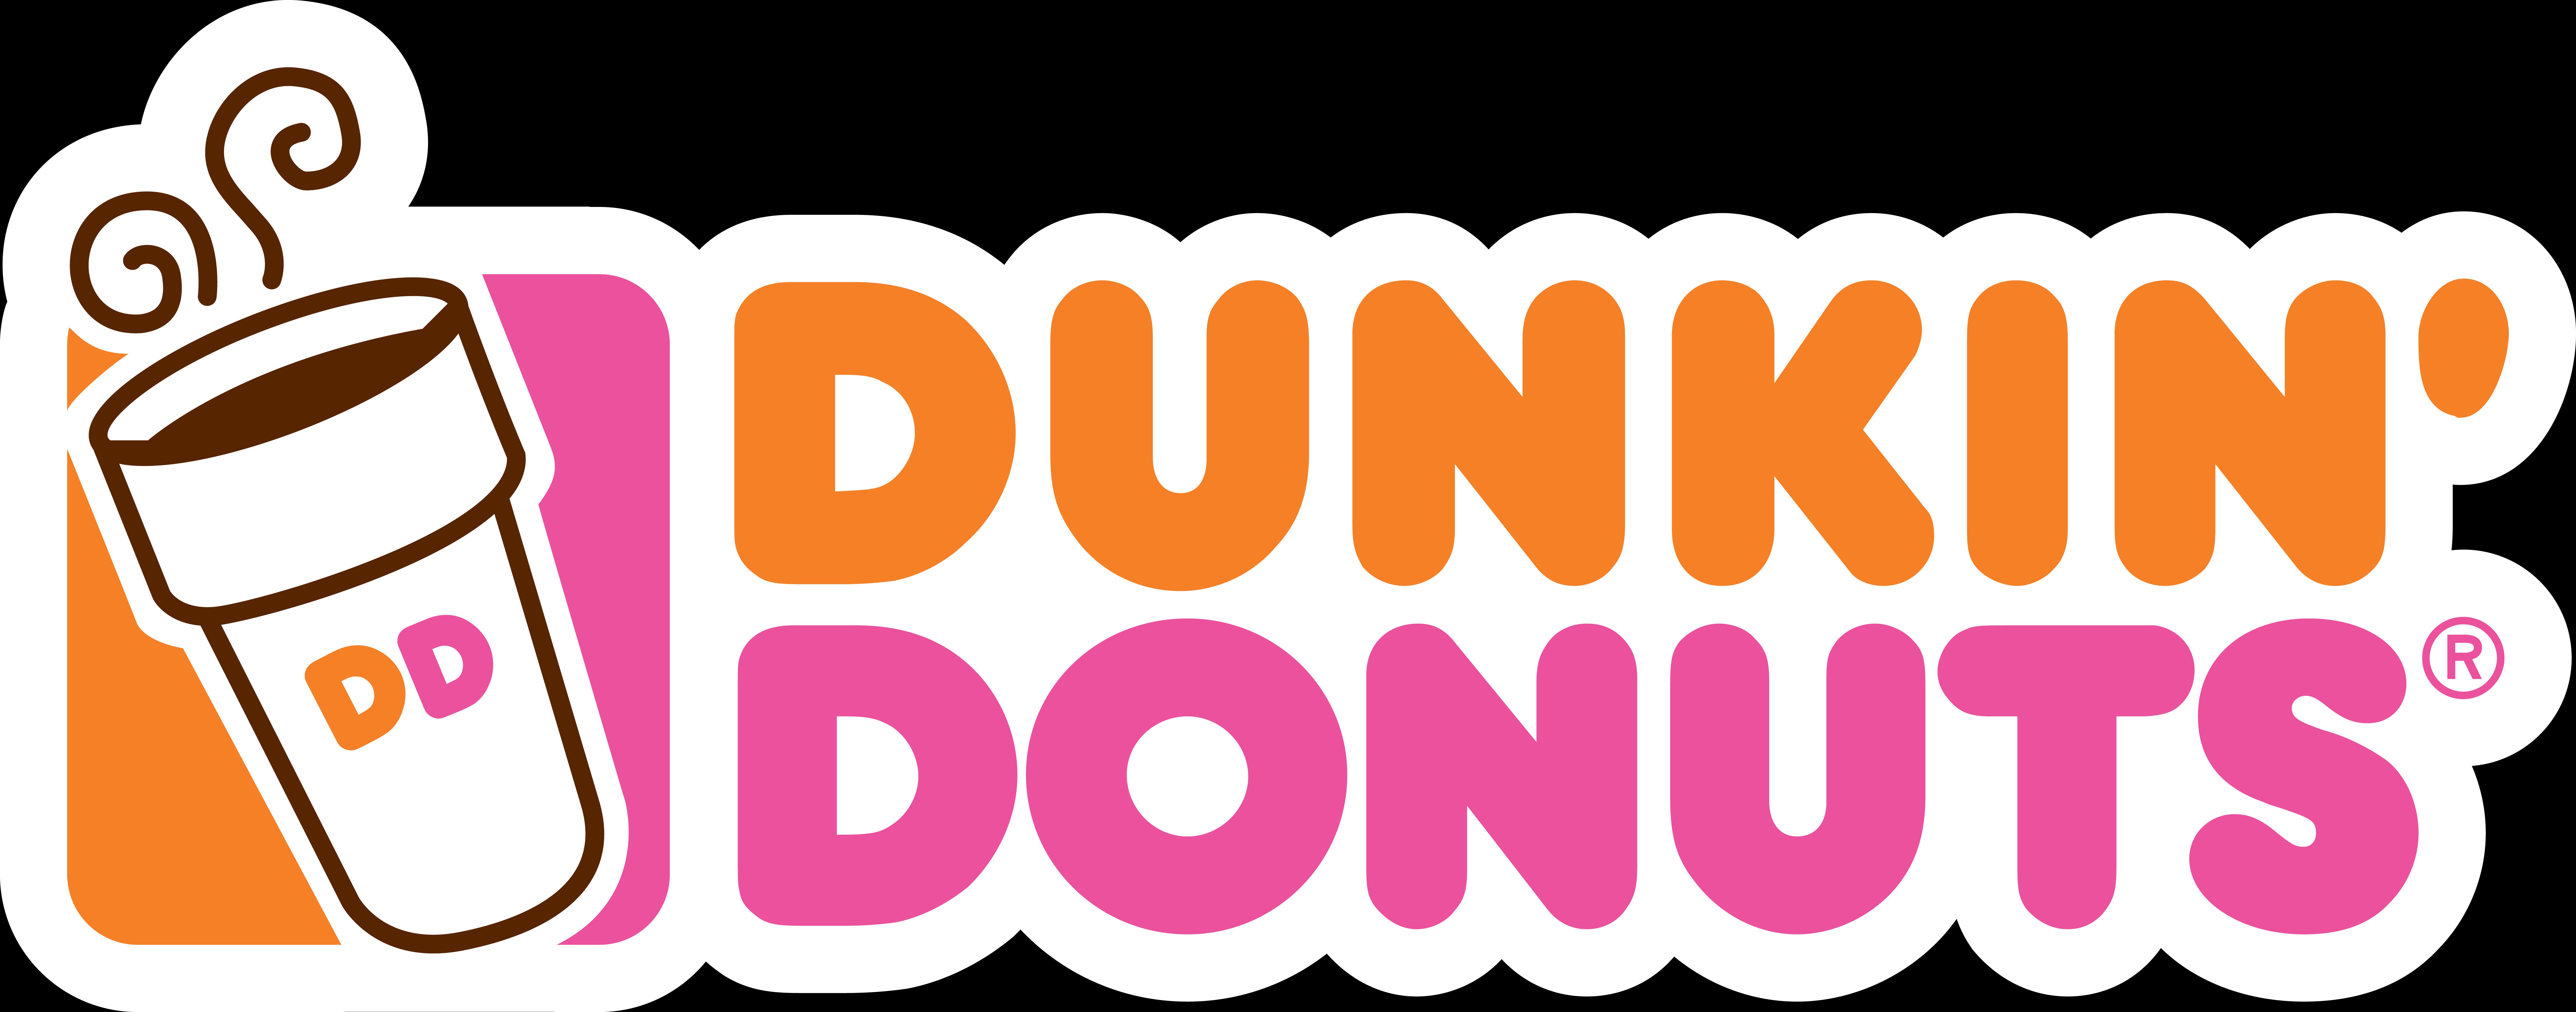 Ad or Not? SNL & Dunkin' Donuts - Truth in Advertising